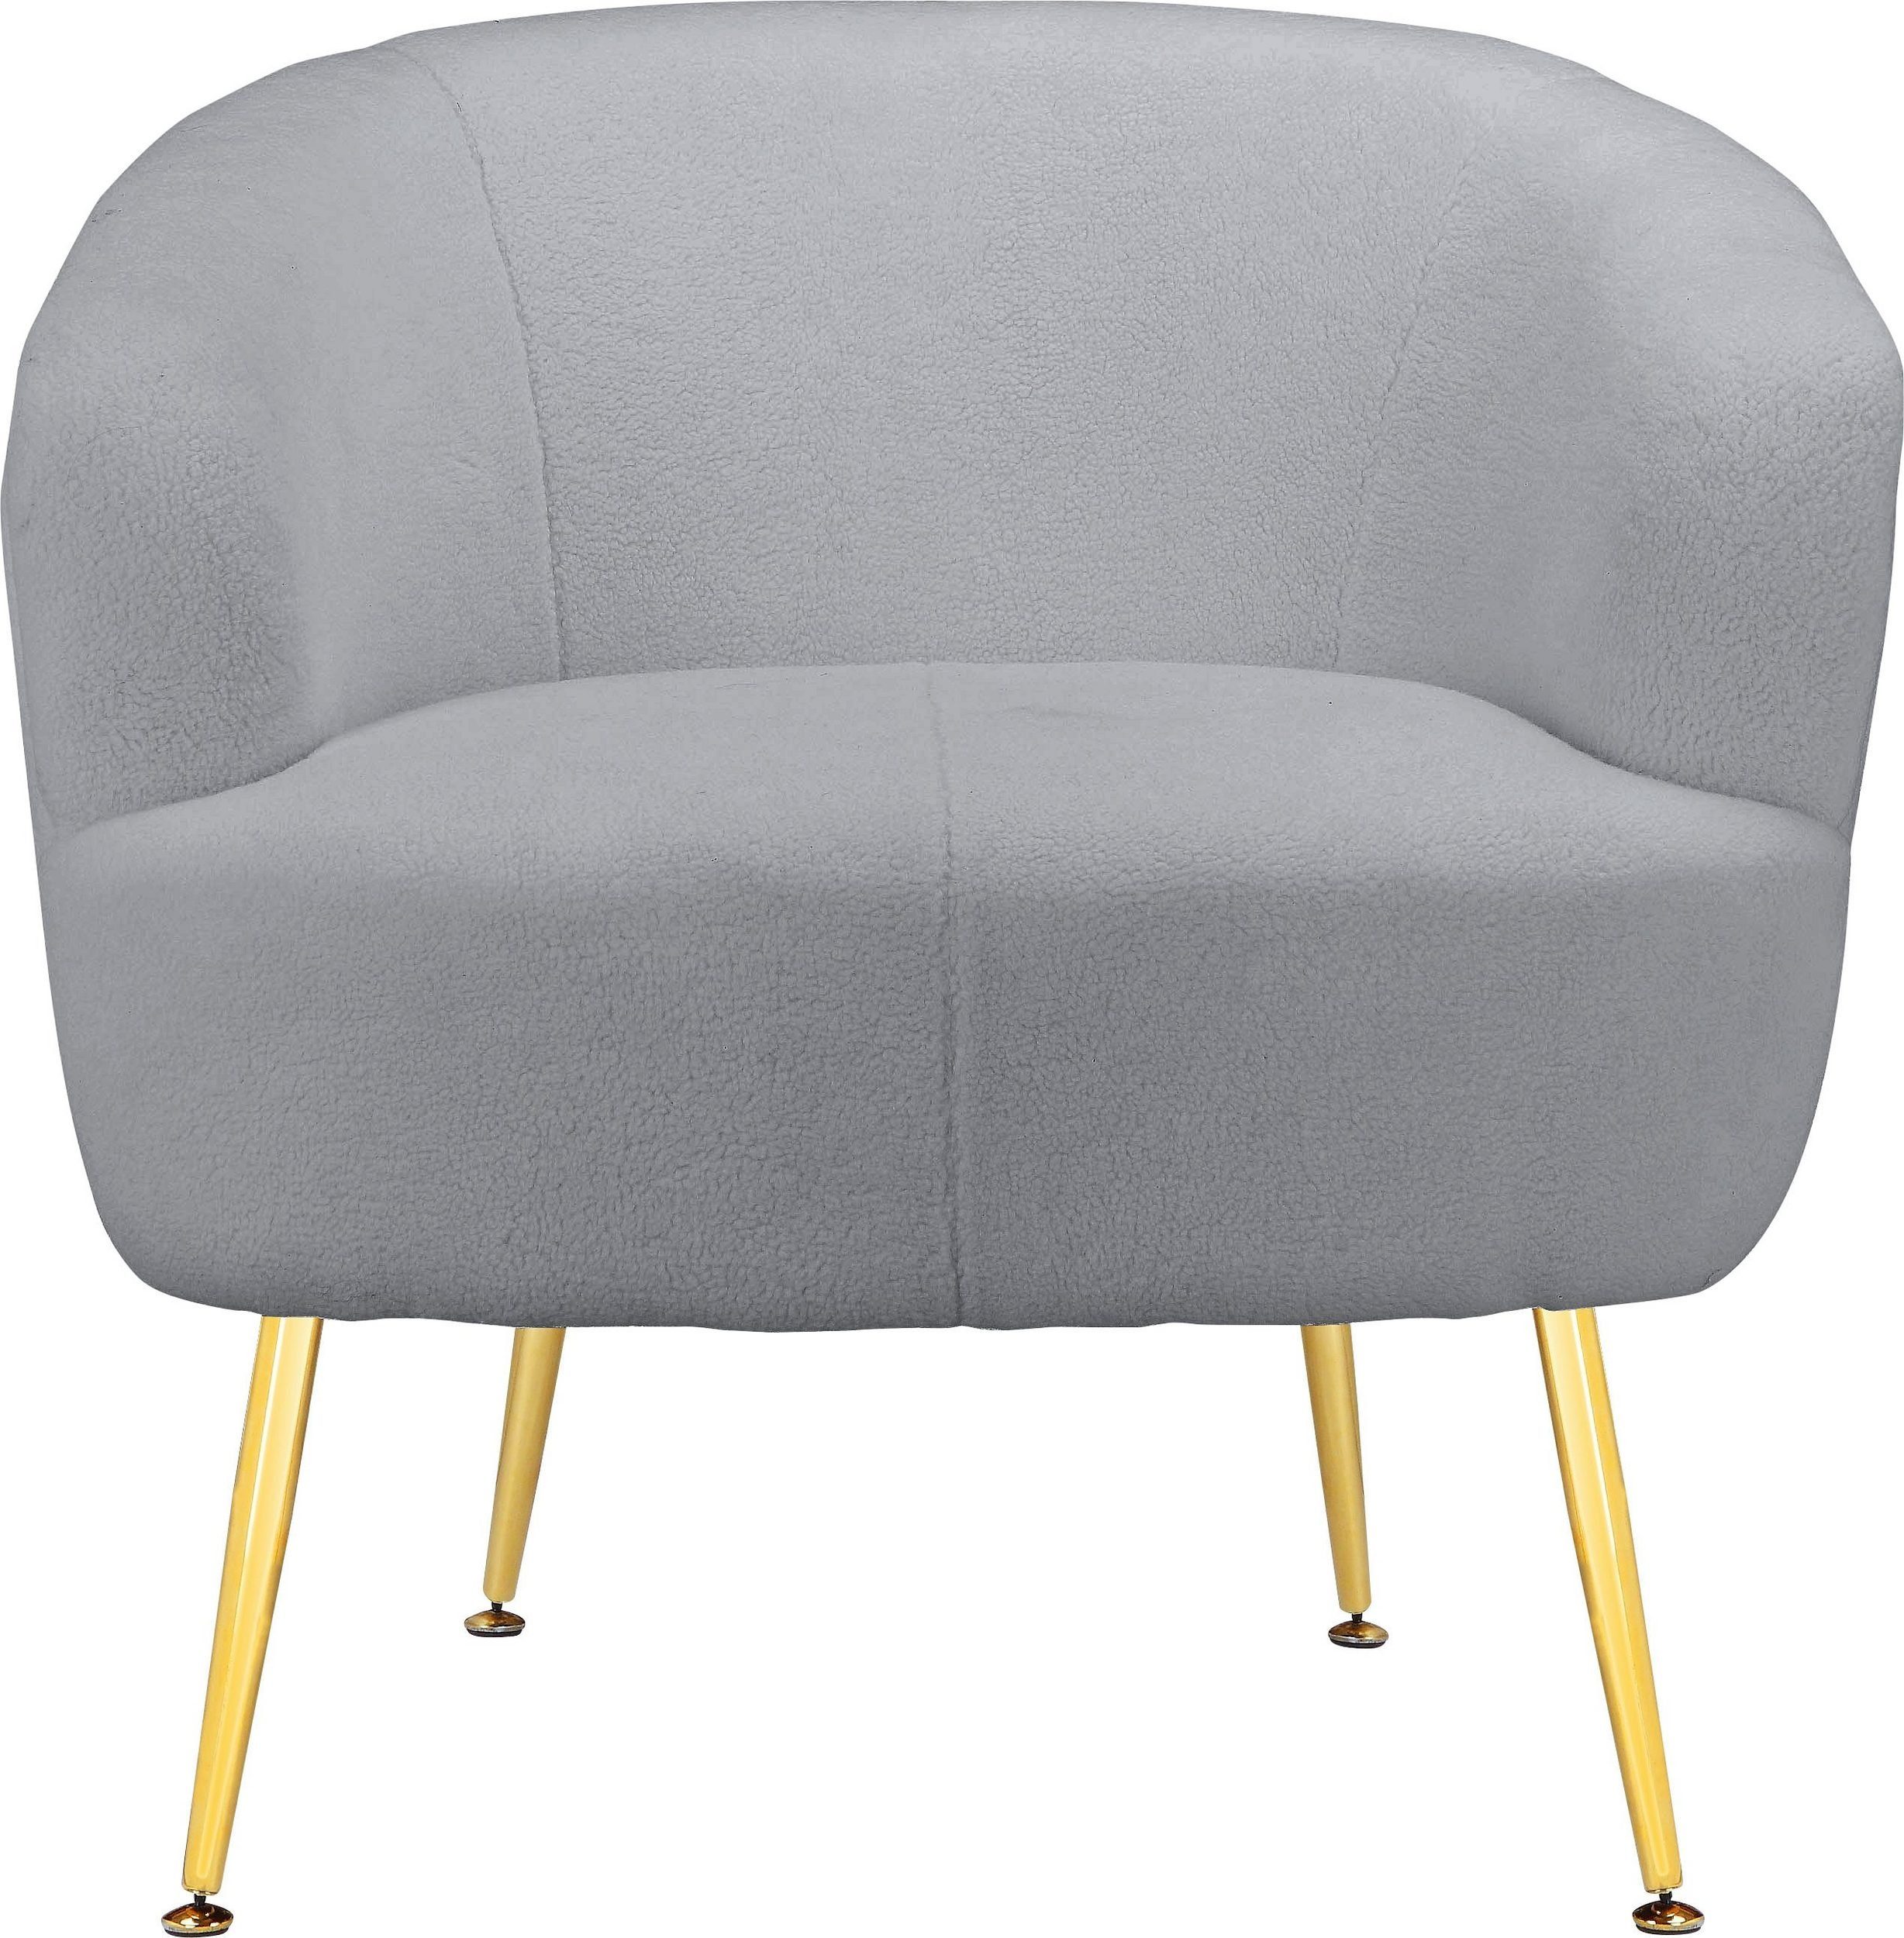 Loungesessel gold loft24 with Upholstered color Scavo, armchair